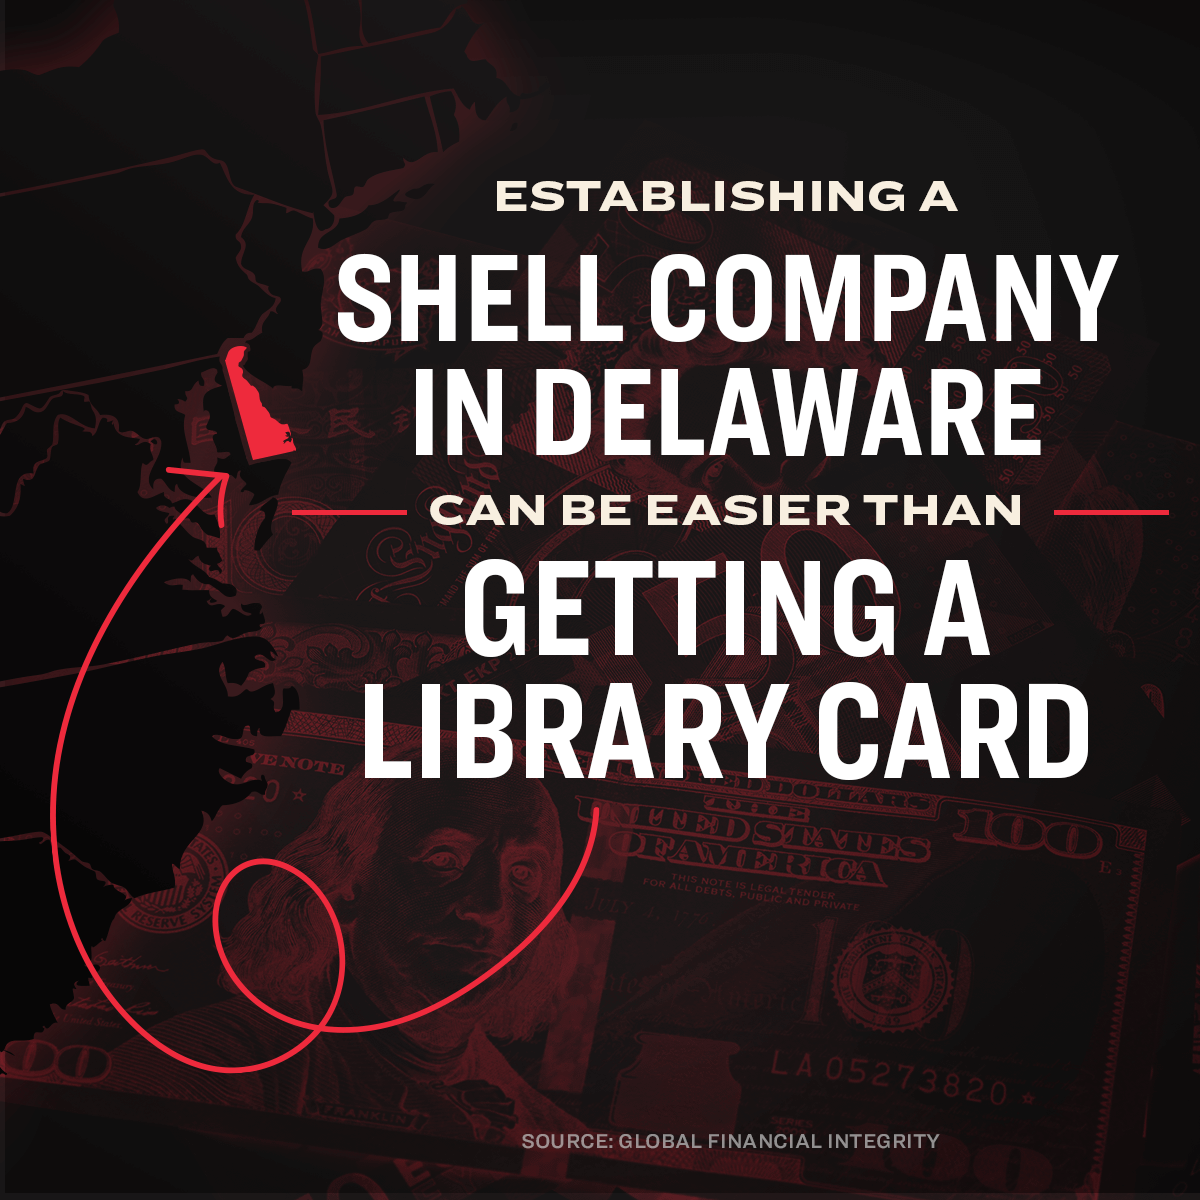 Establishing a shell company is Delaware can be easier than getting a library card.